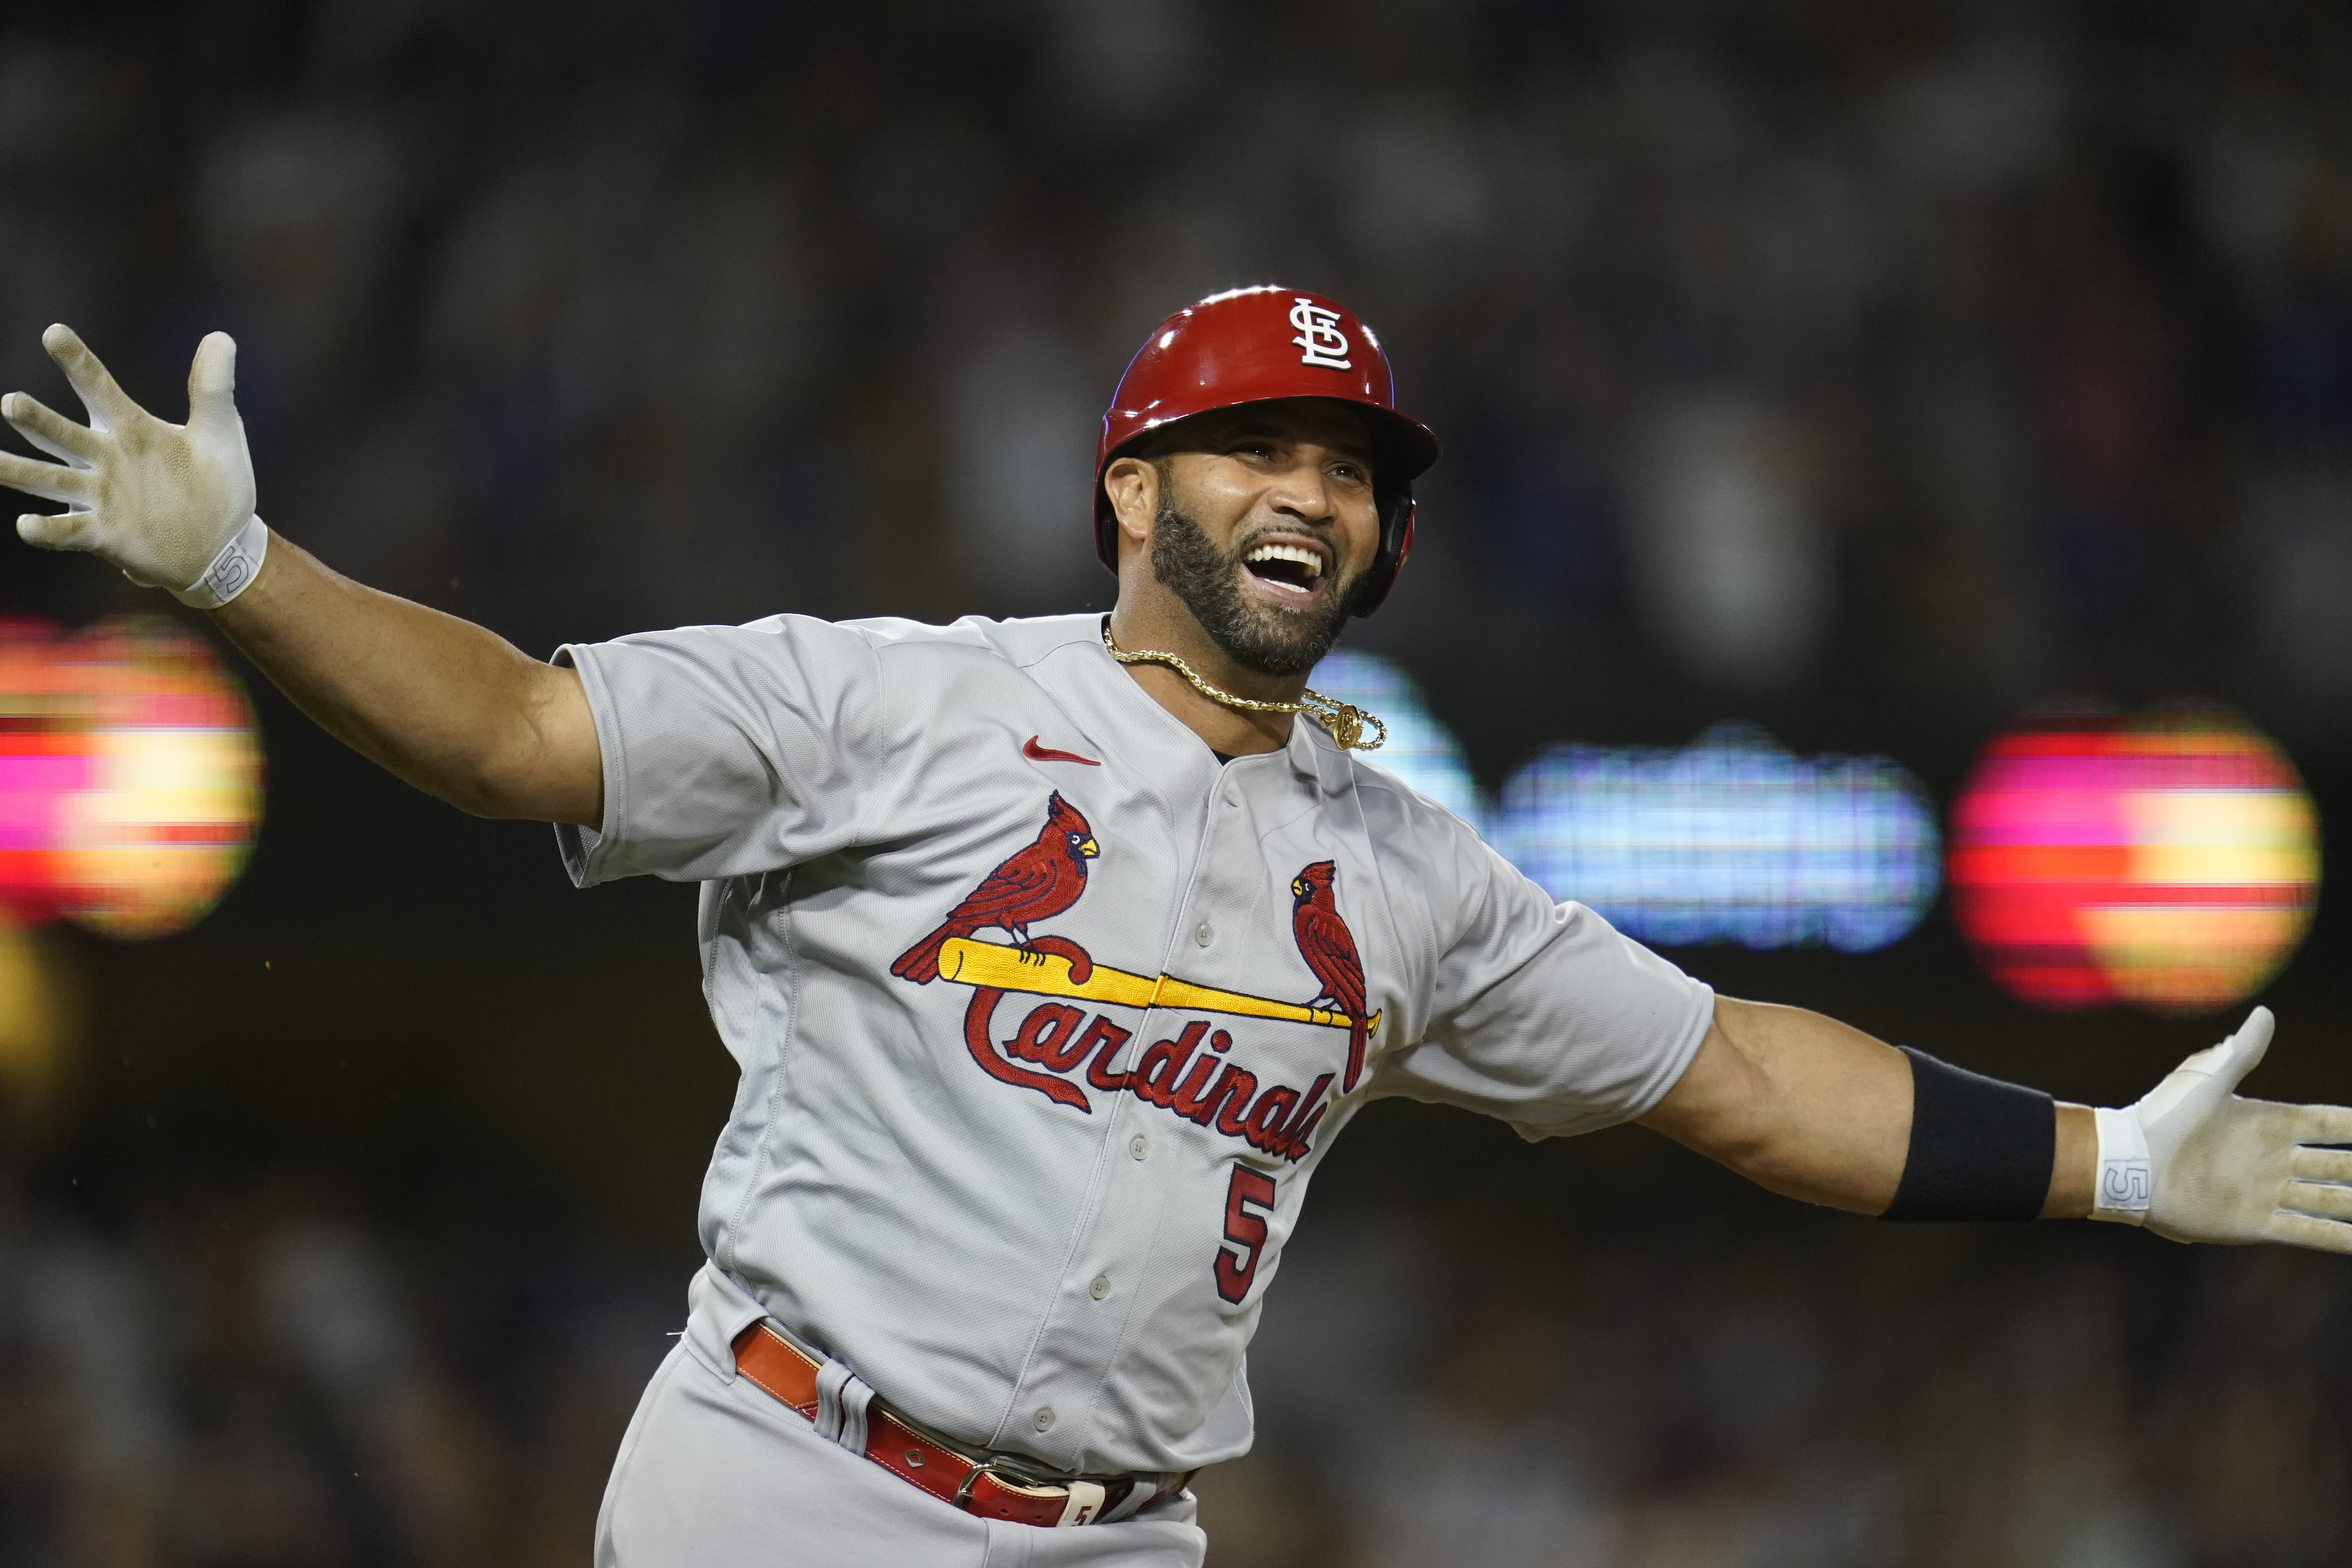 Pujols hits club-record 4th slam in Cards' win